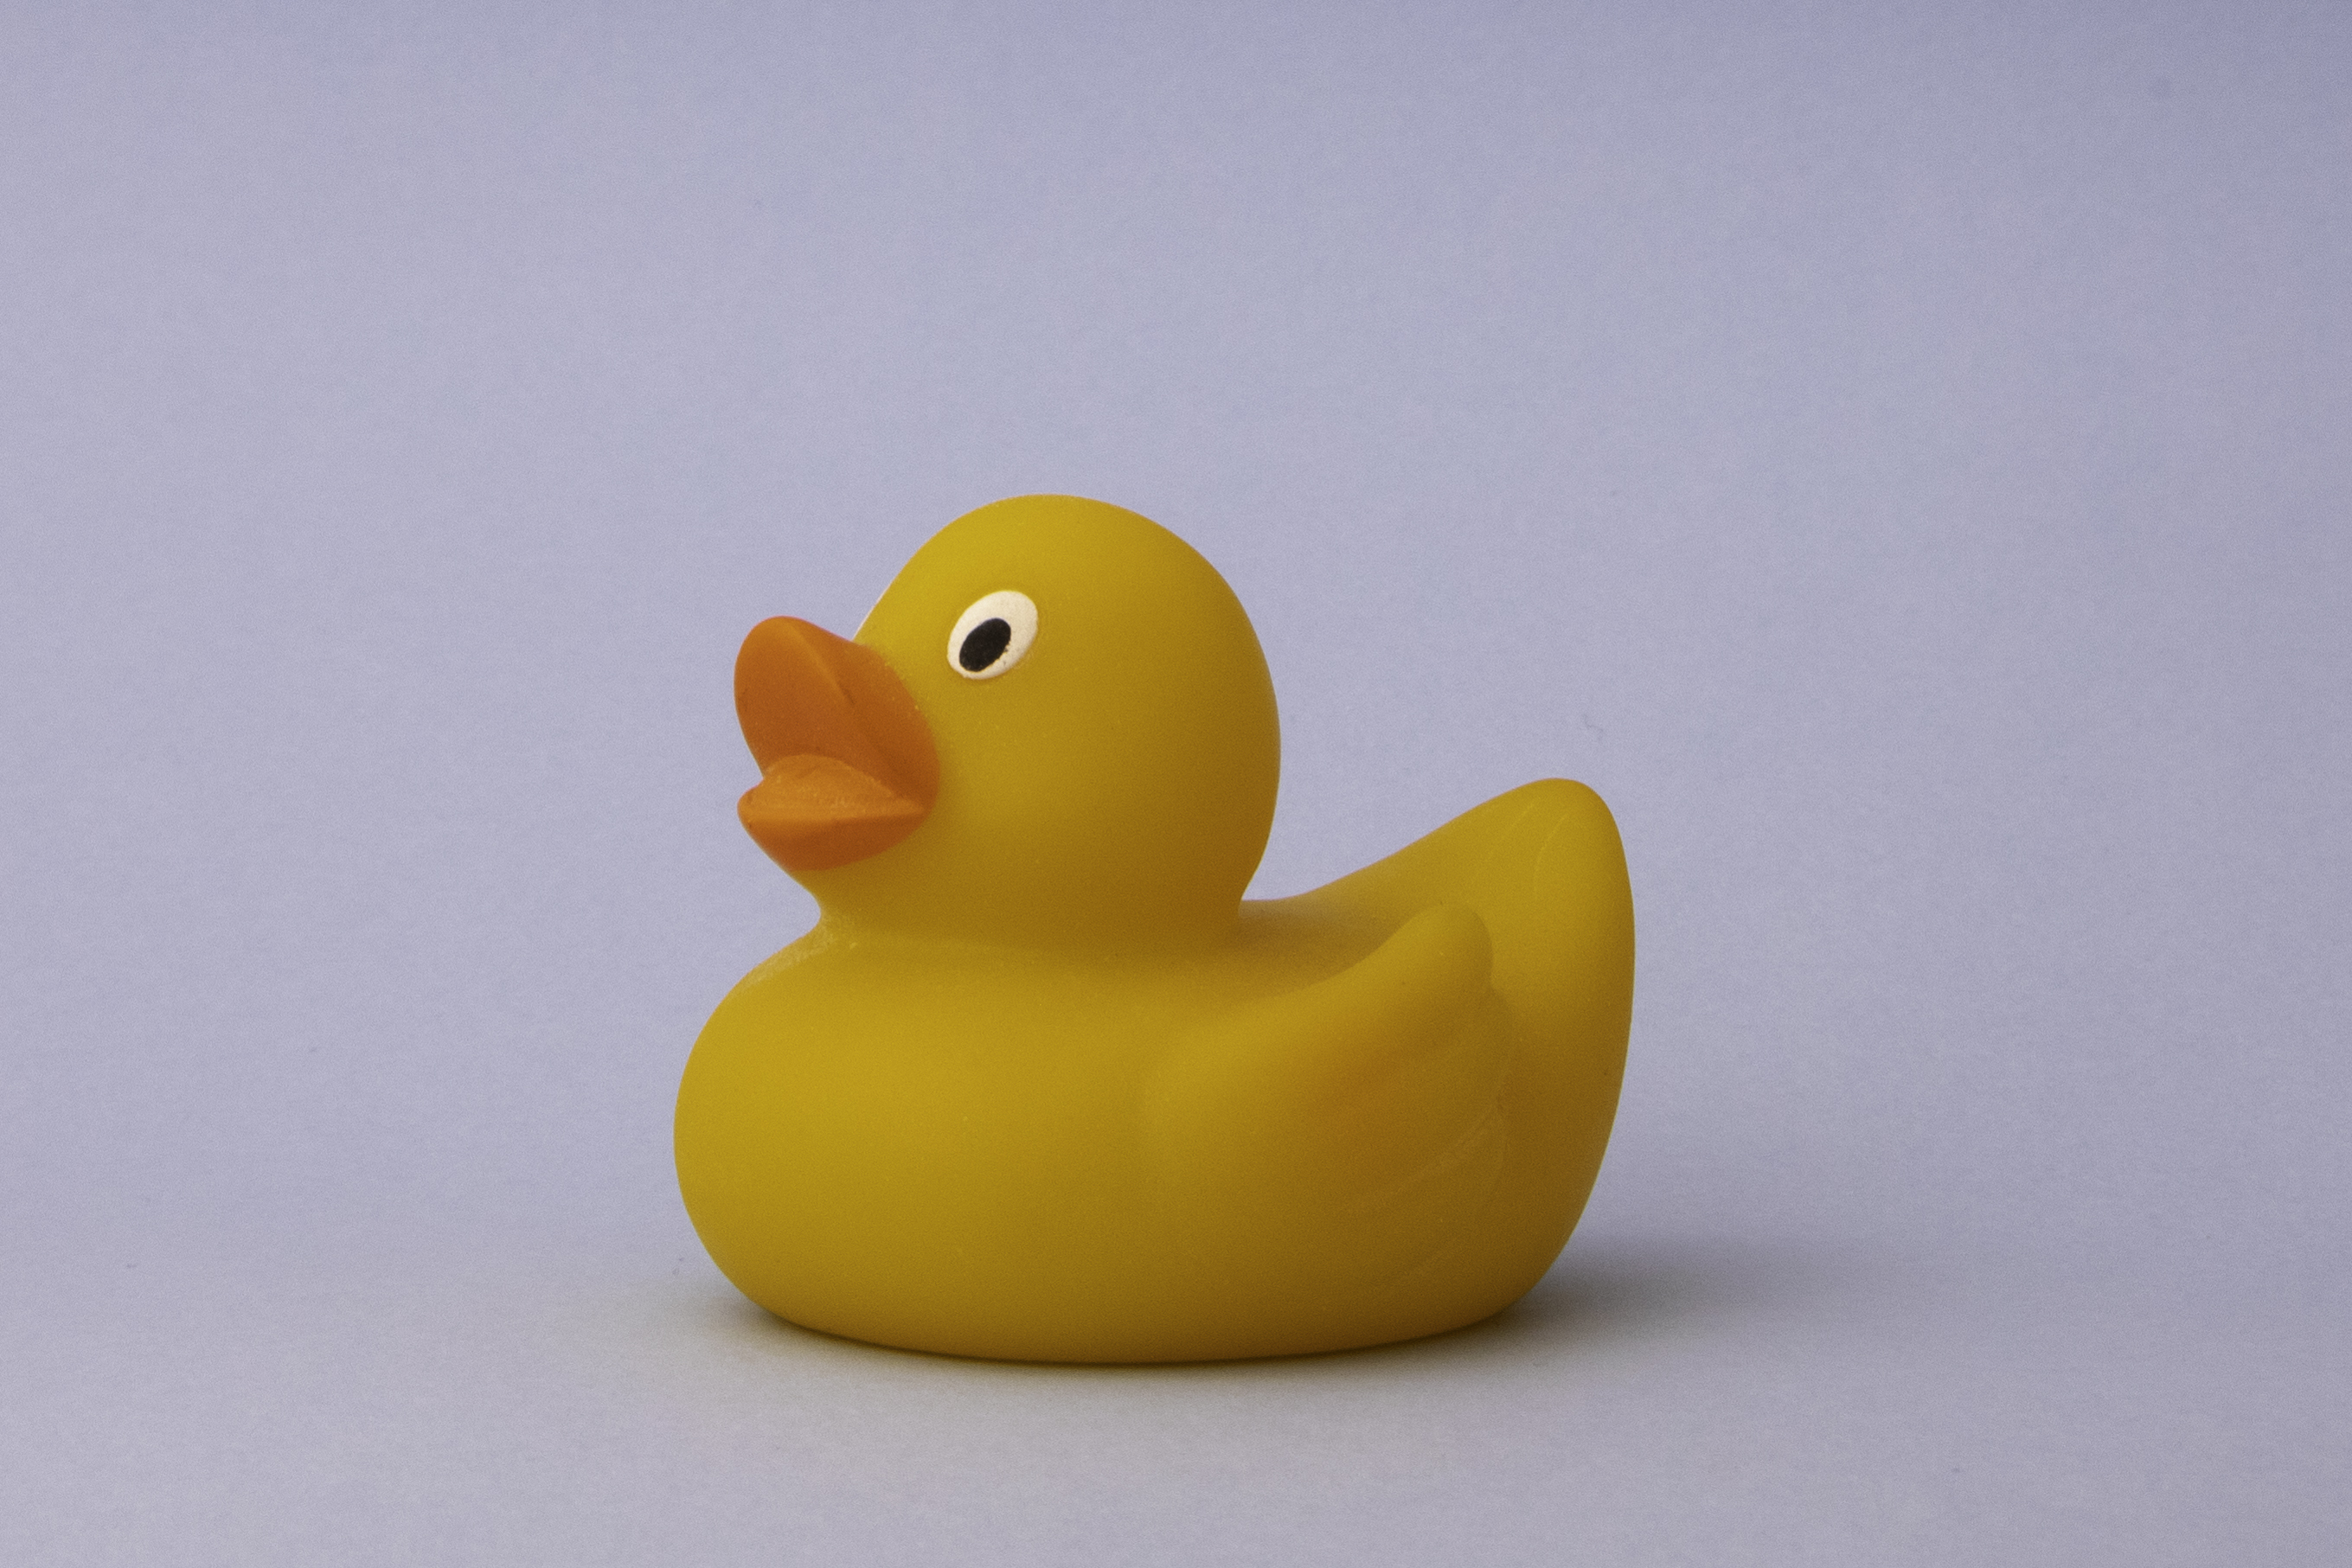 Rubber duck toy on a plain background